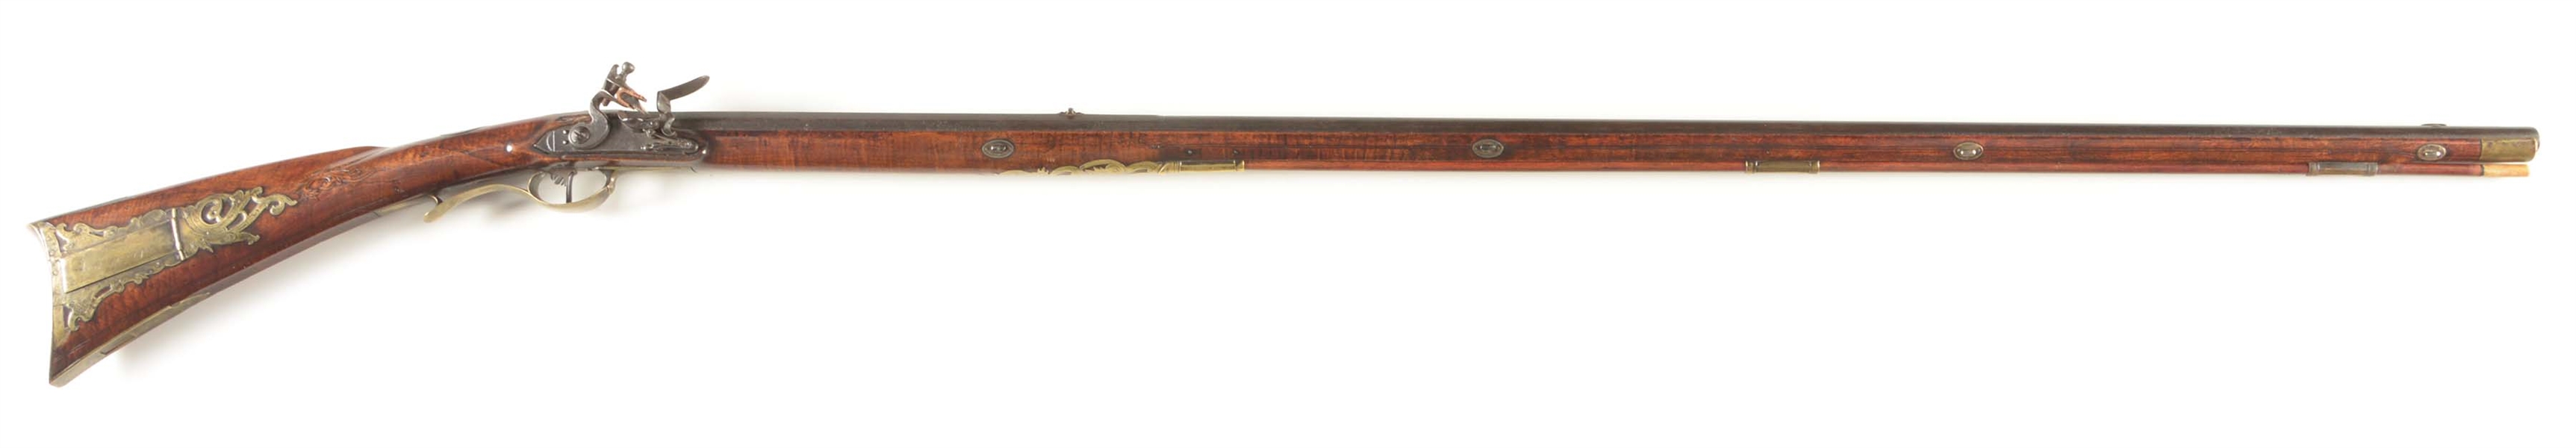 (A) RELIEF CARVED AND ORNATE FLINTLOCK KENTUCKY RIFLE SIGNED JOHN YOUNG ON PATCHBOX AND BARREL.